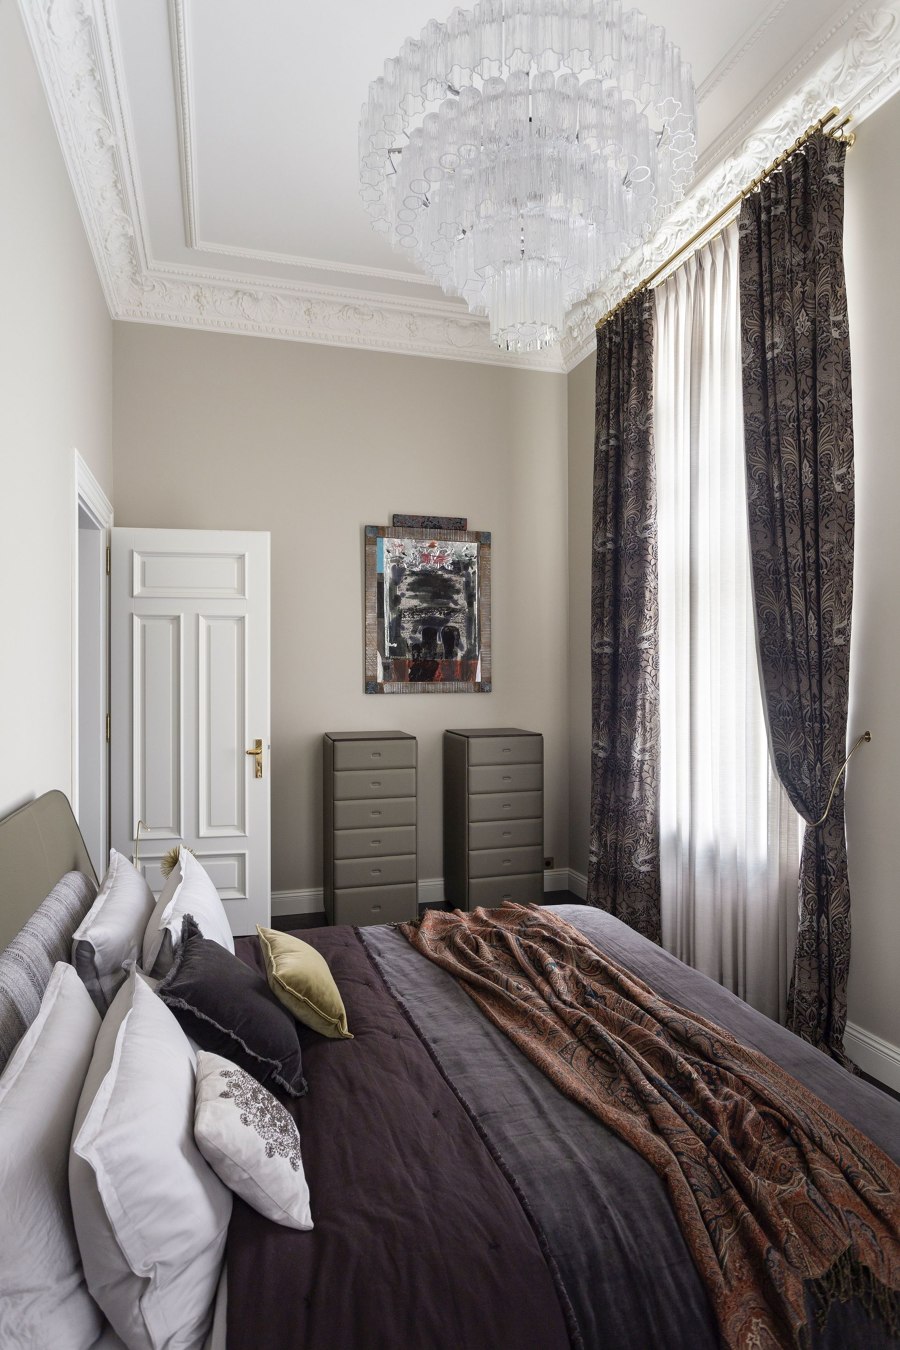 Polish Art and Italian Design in Warsaw Apartment by mow.design | Living space